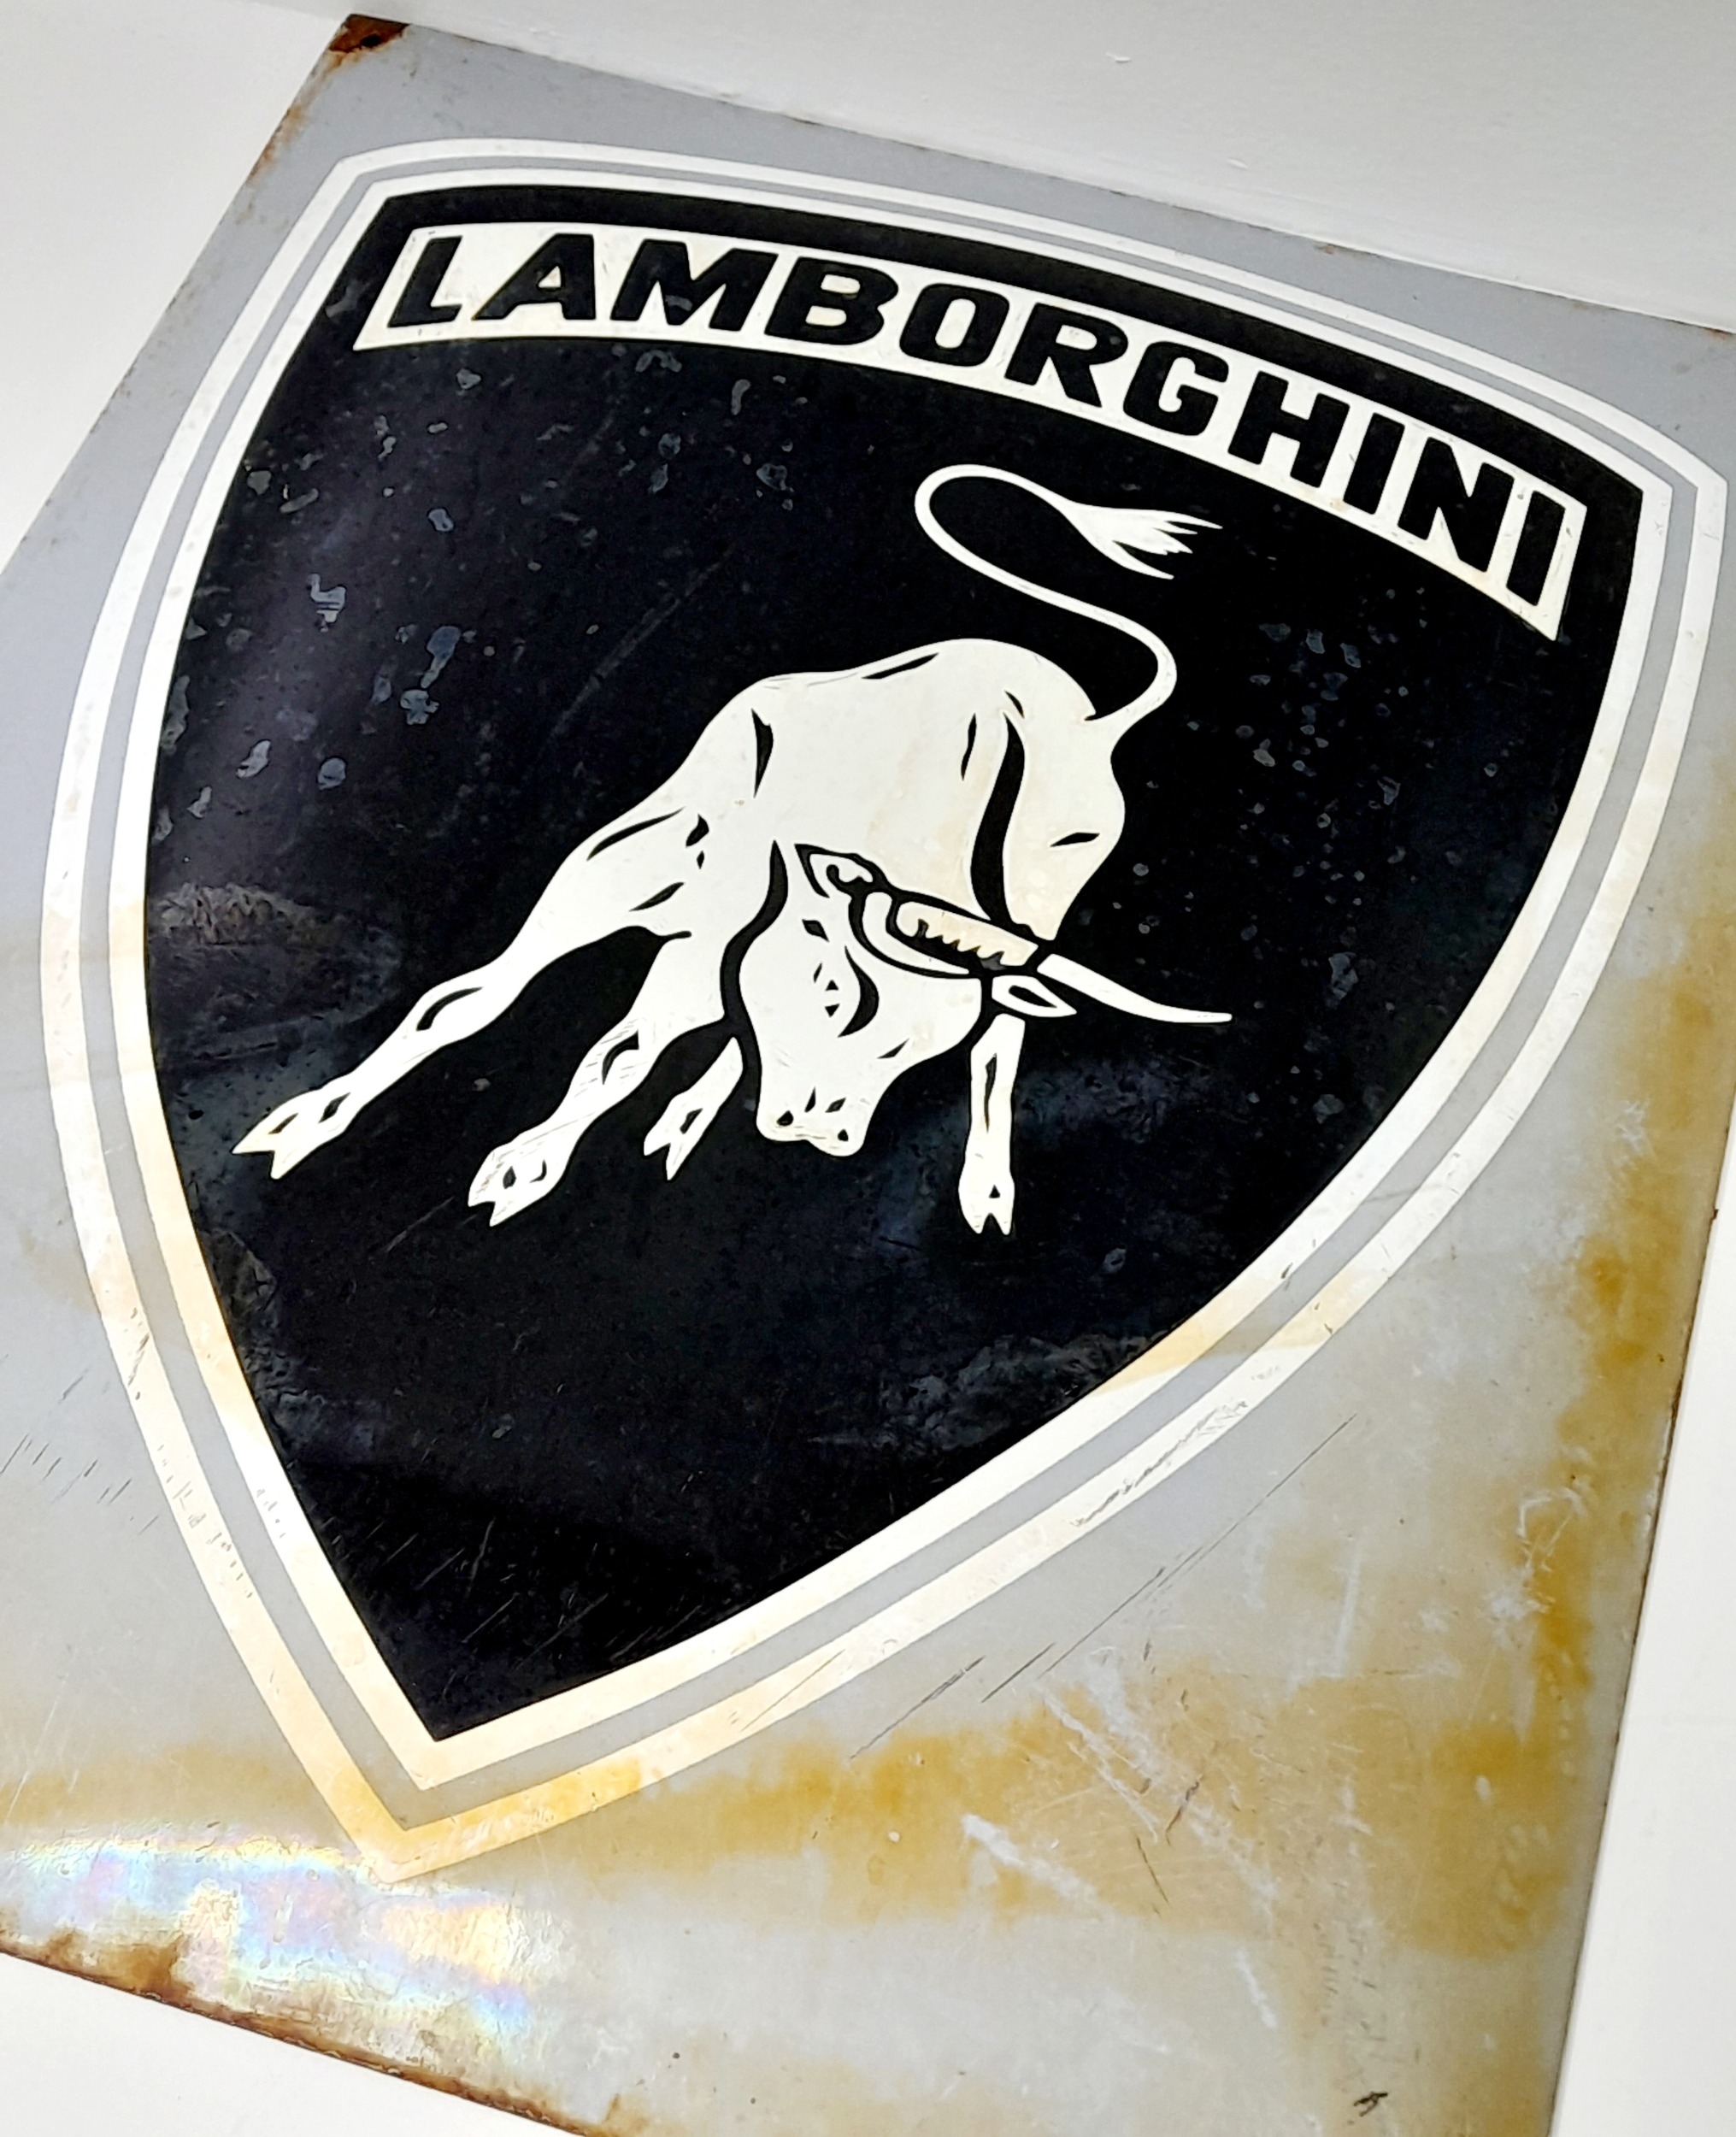 A Rare 1970s Lamborghini Oblong, Convex Enamel Sign - with the Raging Bull in White on Black - Image 2 of 5